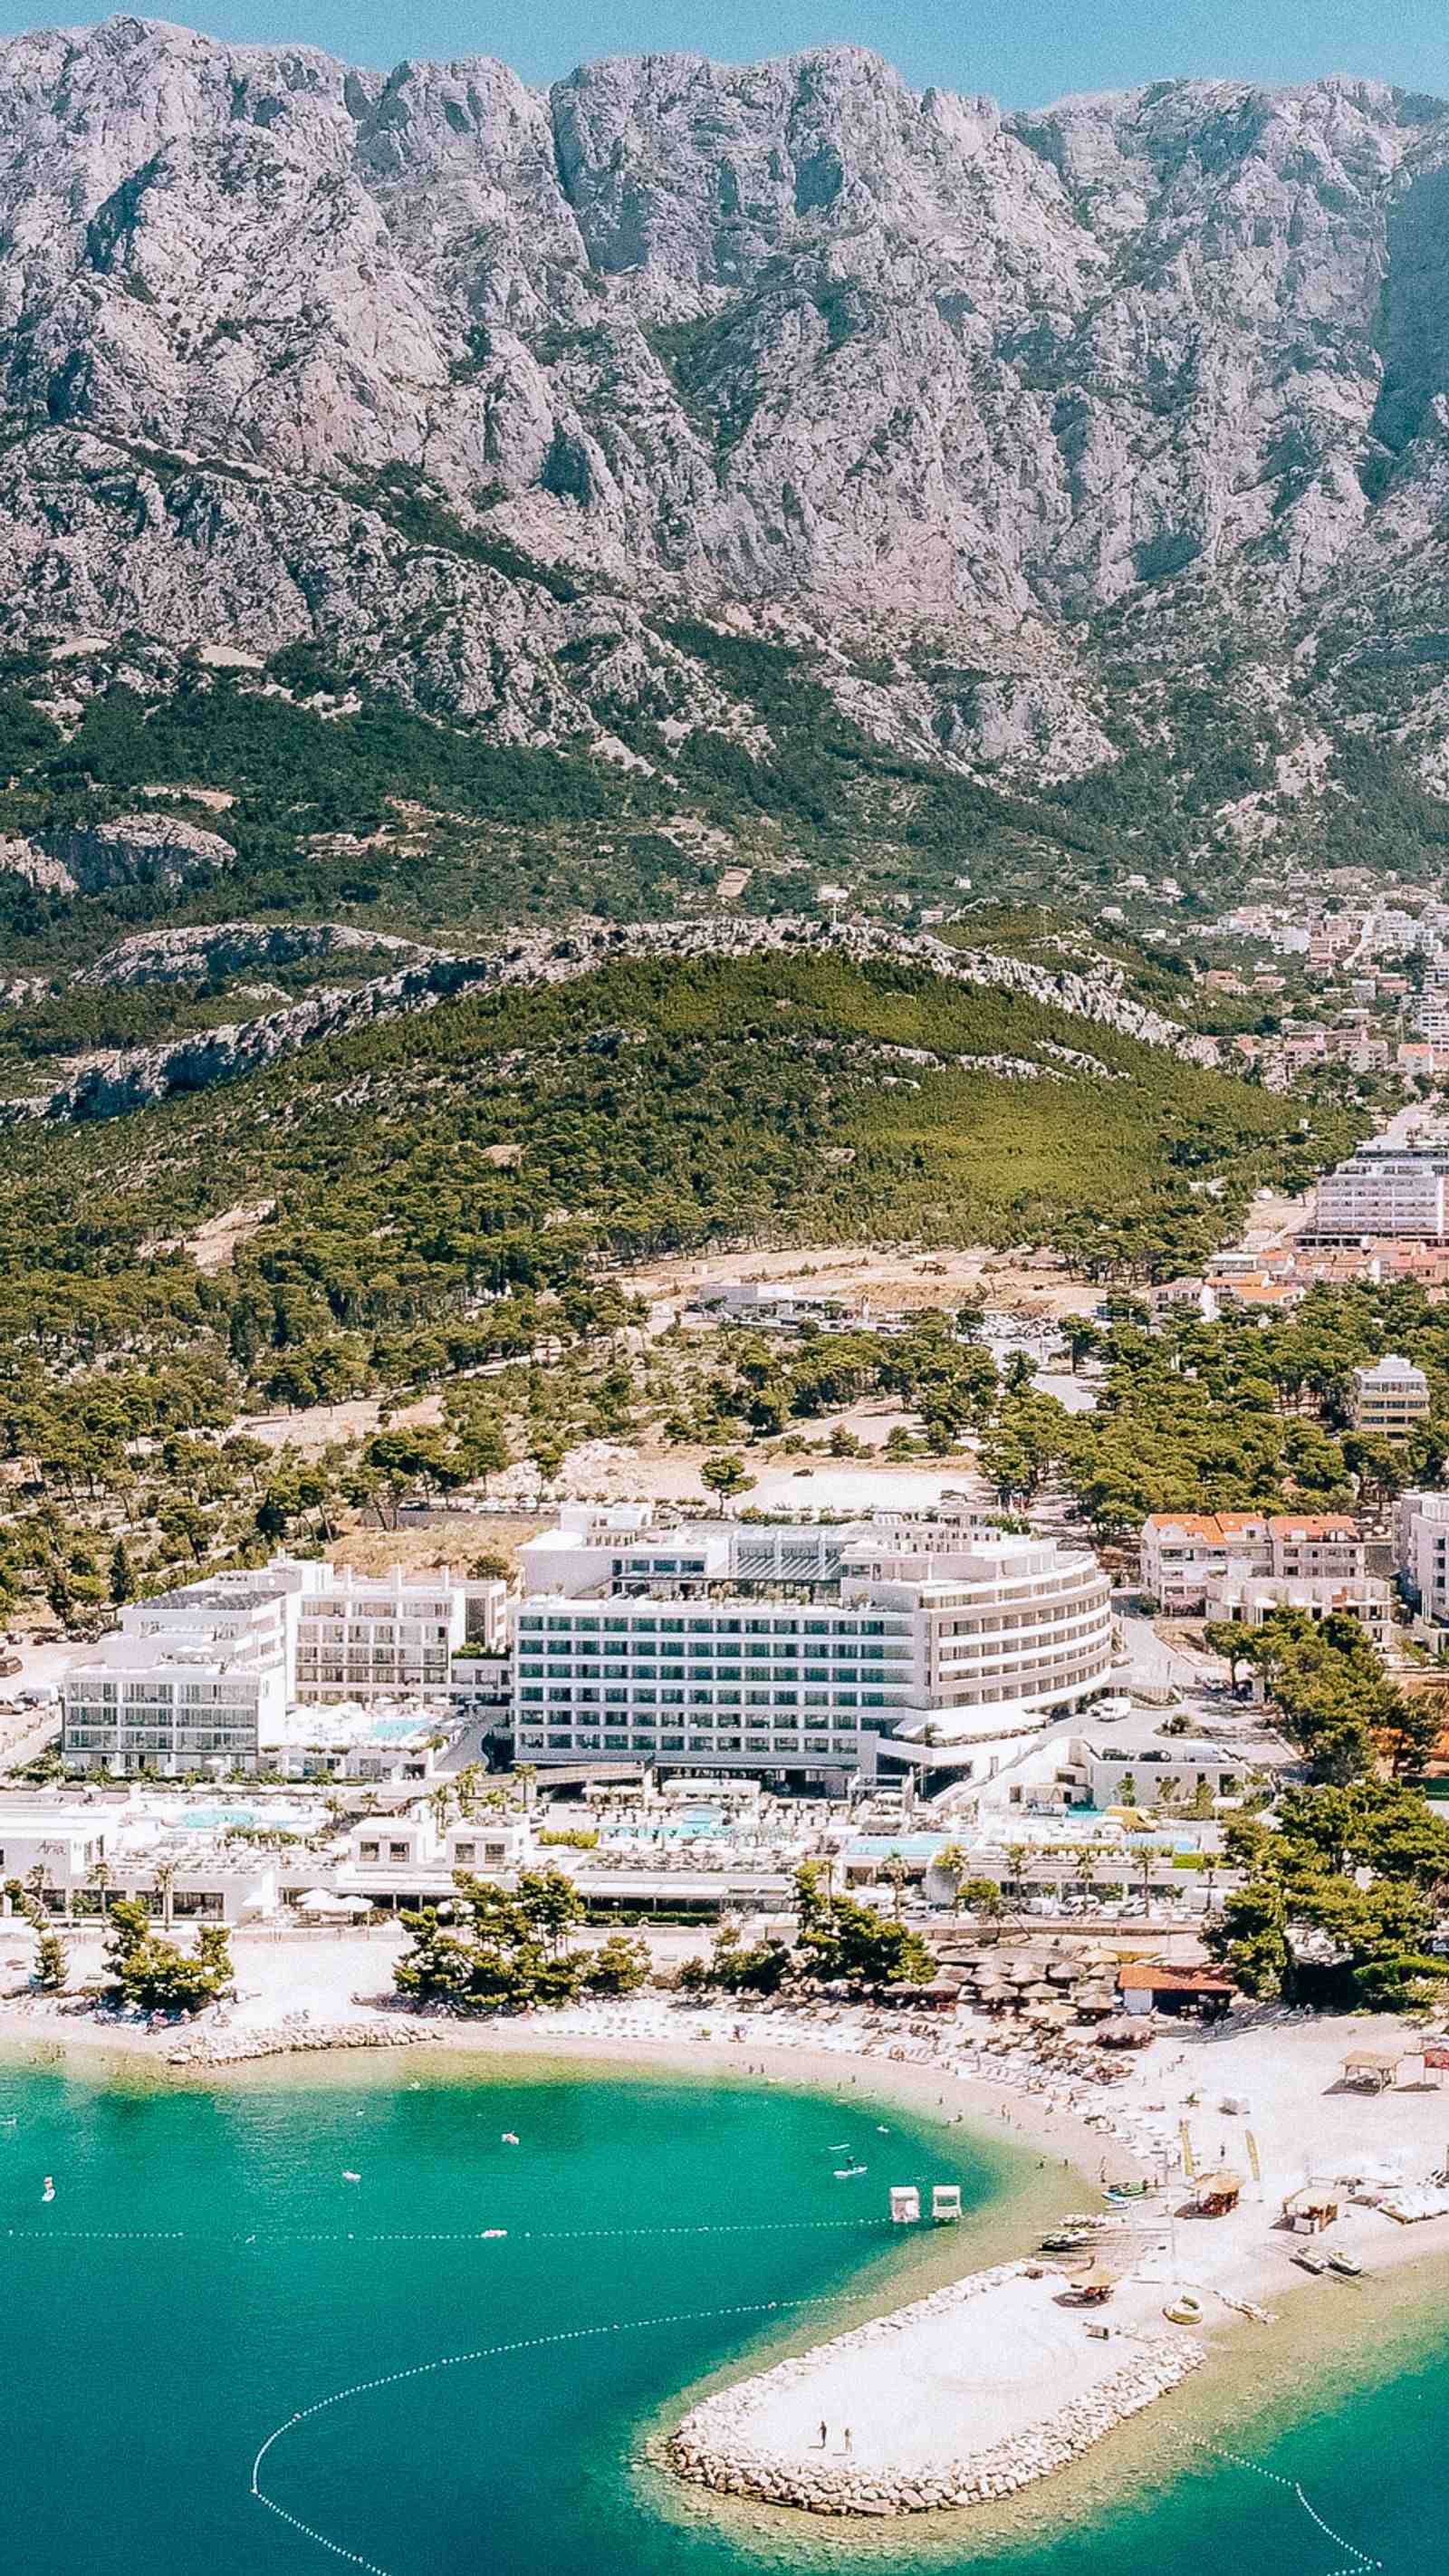 View of Aminess Hotel and the Makarska Riviera